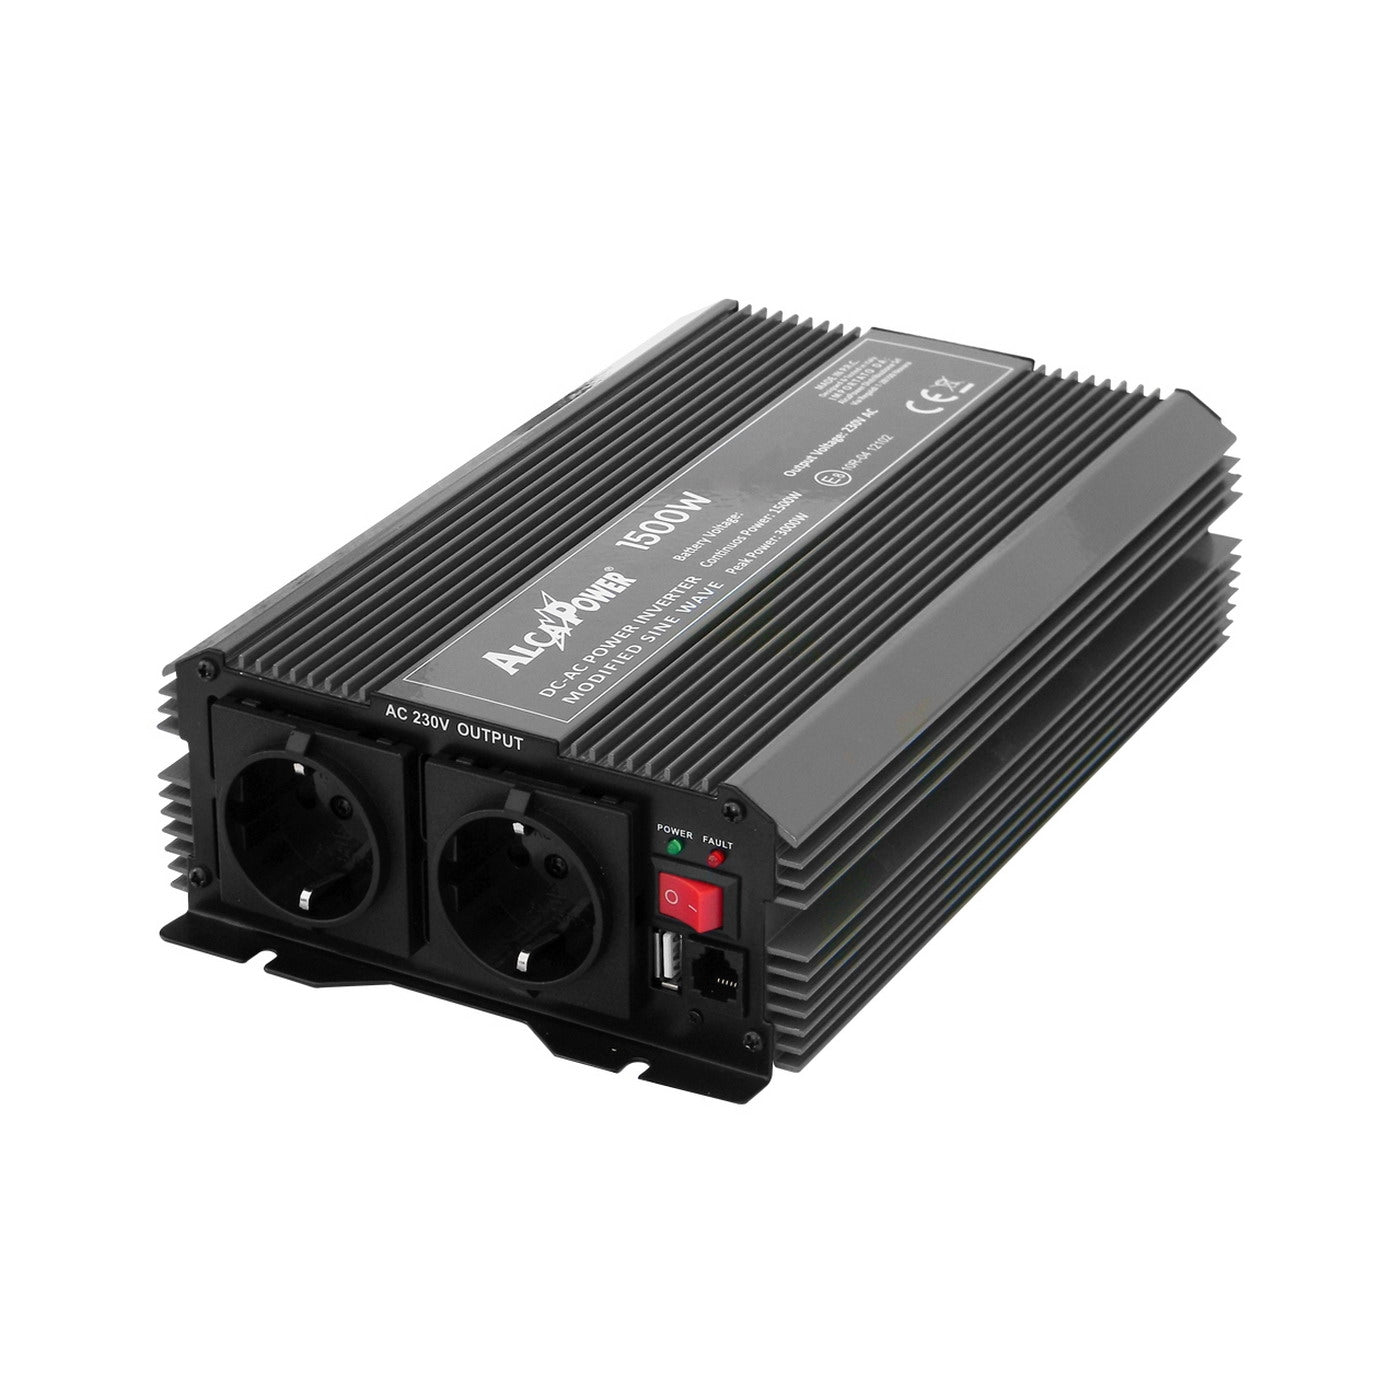 Alcapower Inverter soft start 1500W, Input 24V DC, Out 230V AC, current converter, alarm and automatic shutdown